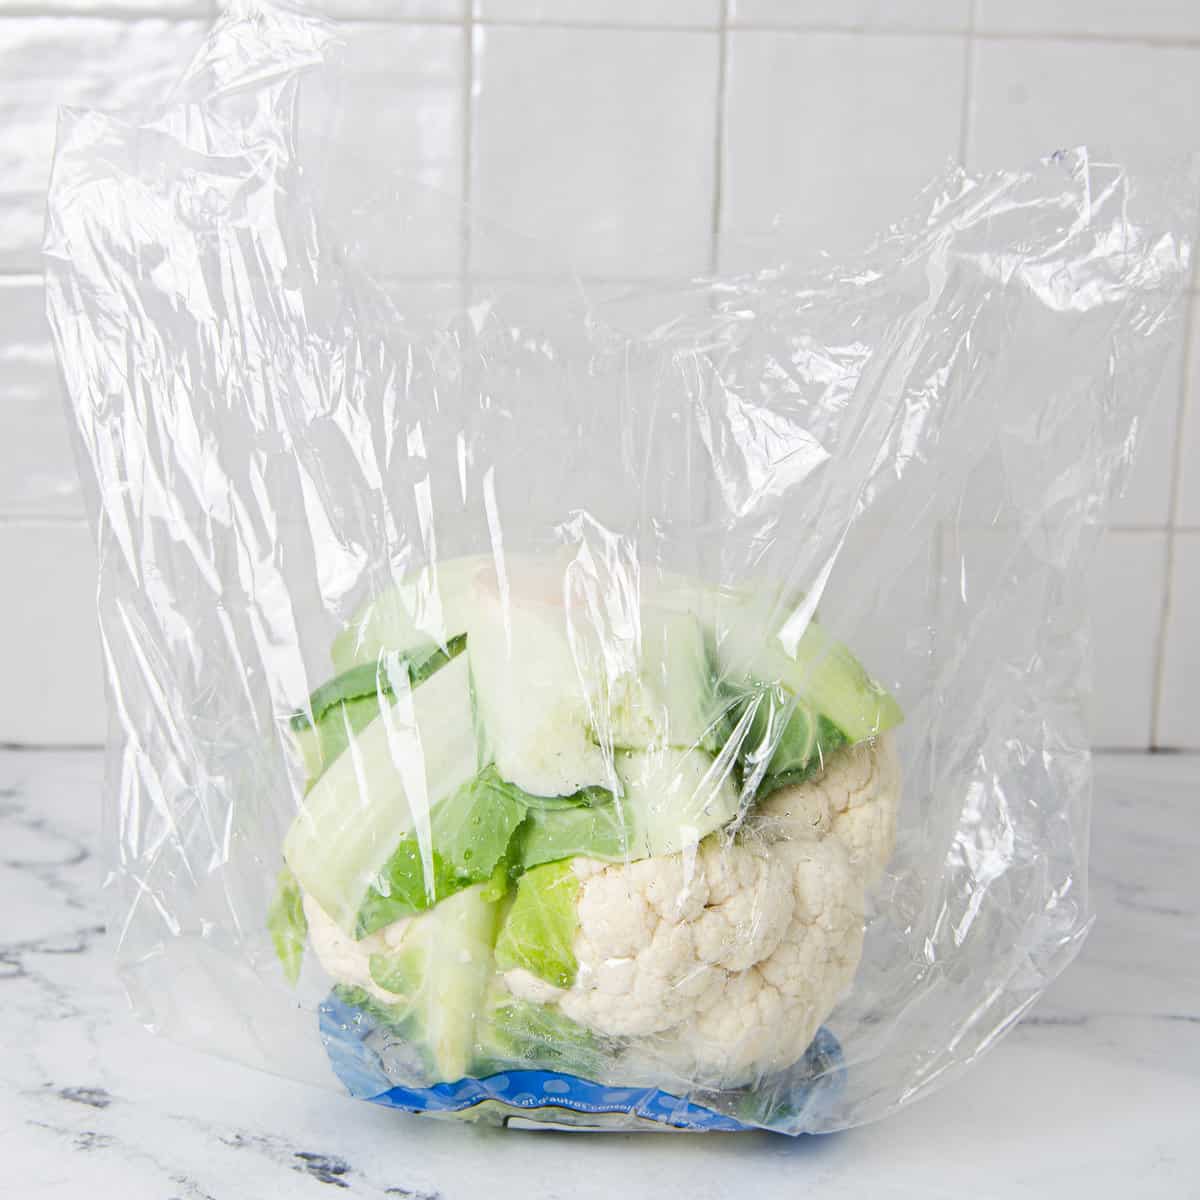 Cauliflower in a loose bag on a kitchen counter.